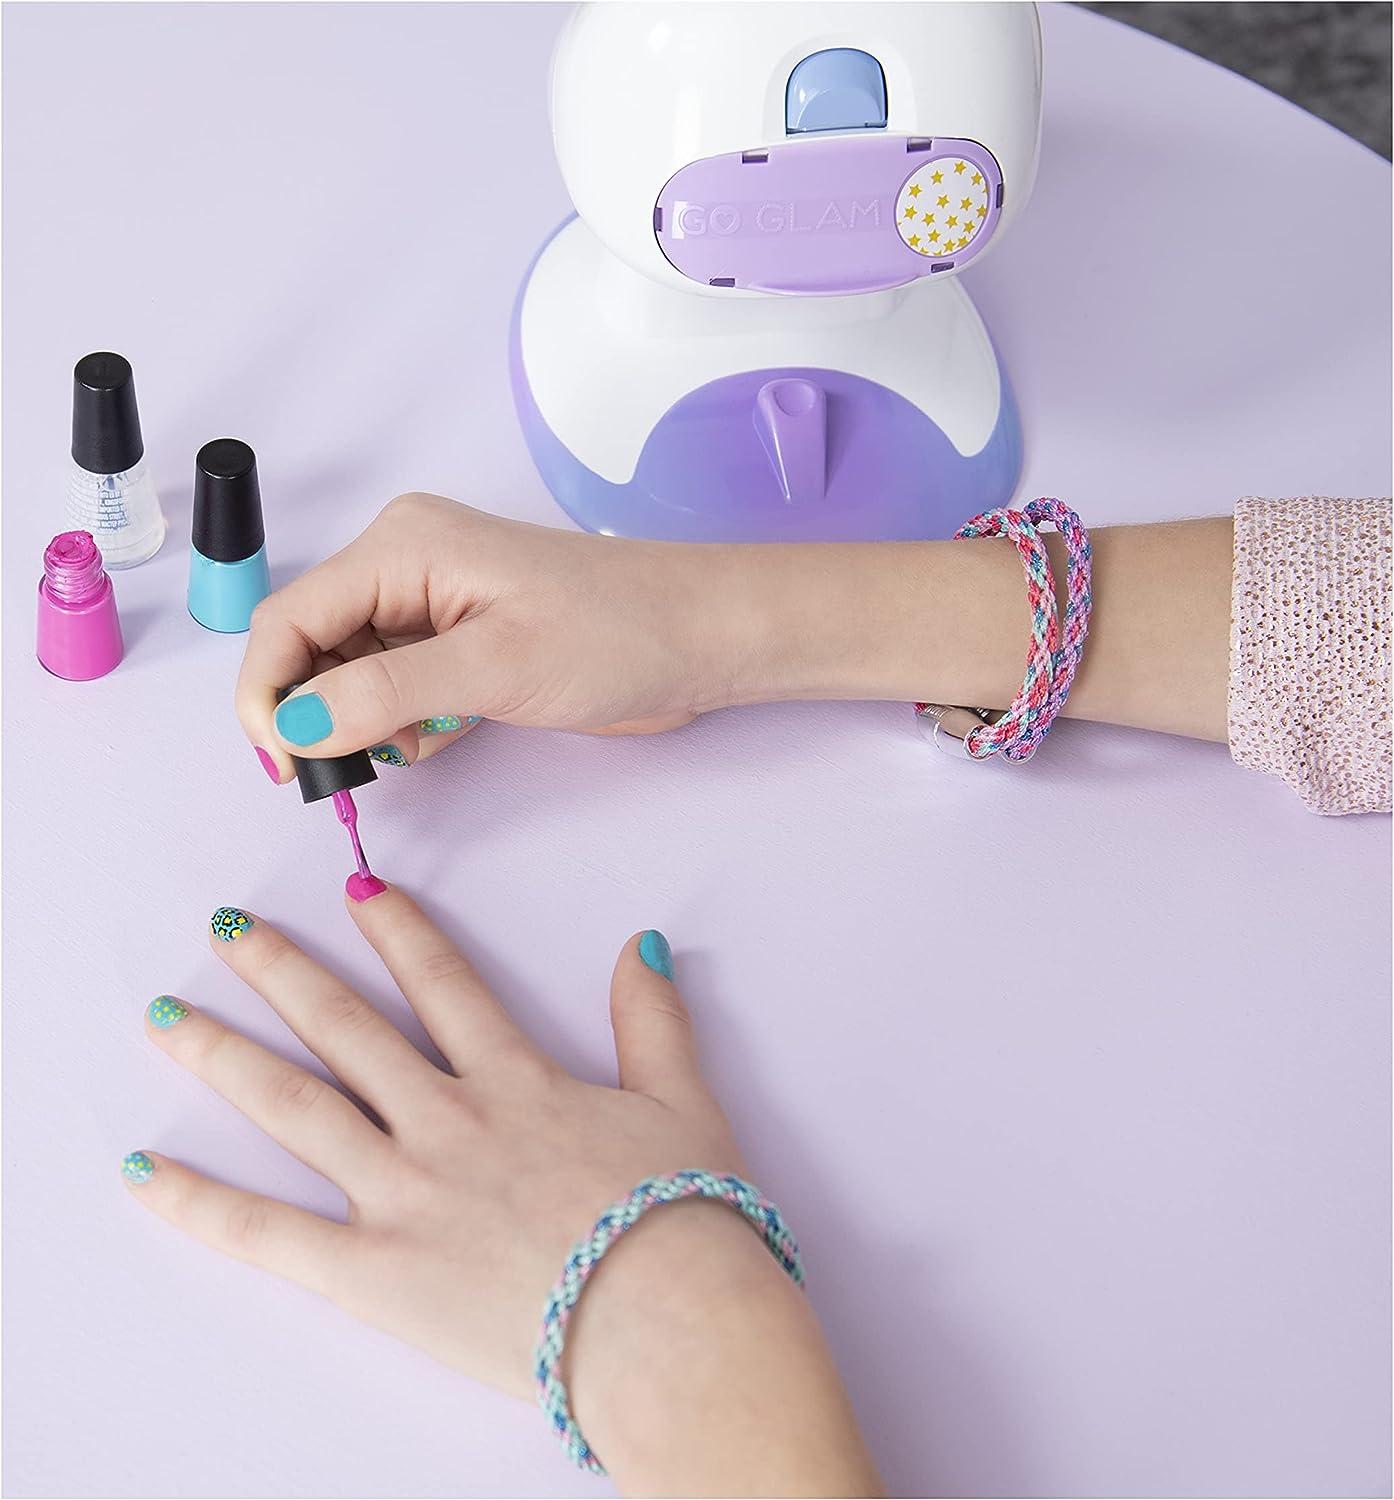 Cool Maker, GO Glam Nail Stamper Deluxe Salon with Dryer for